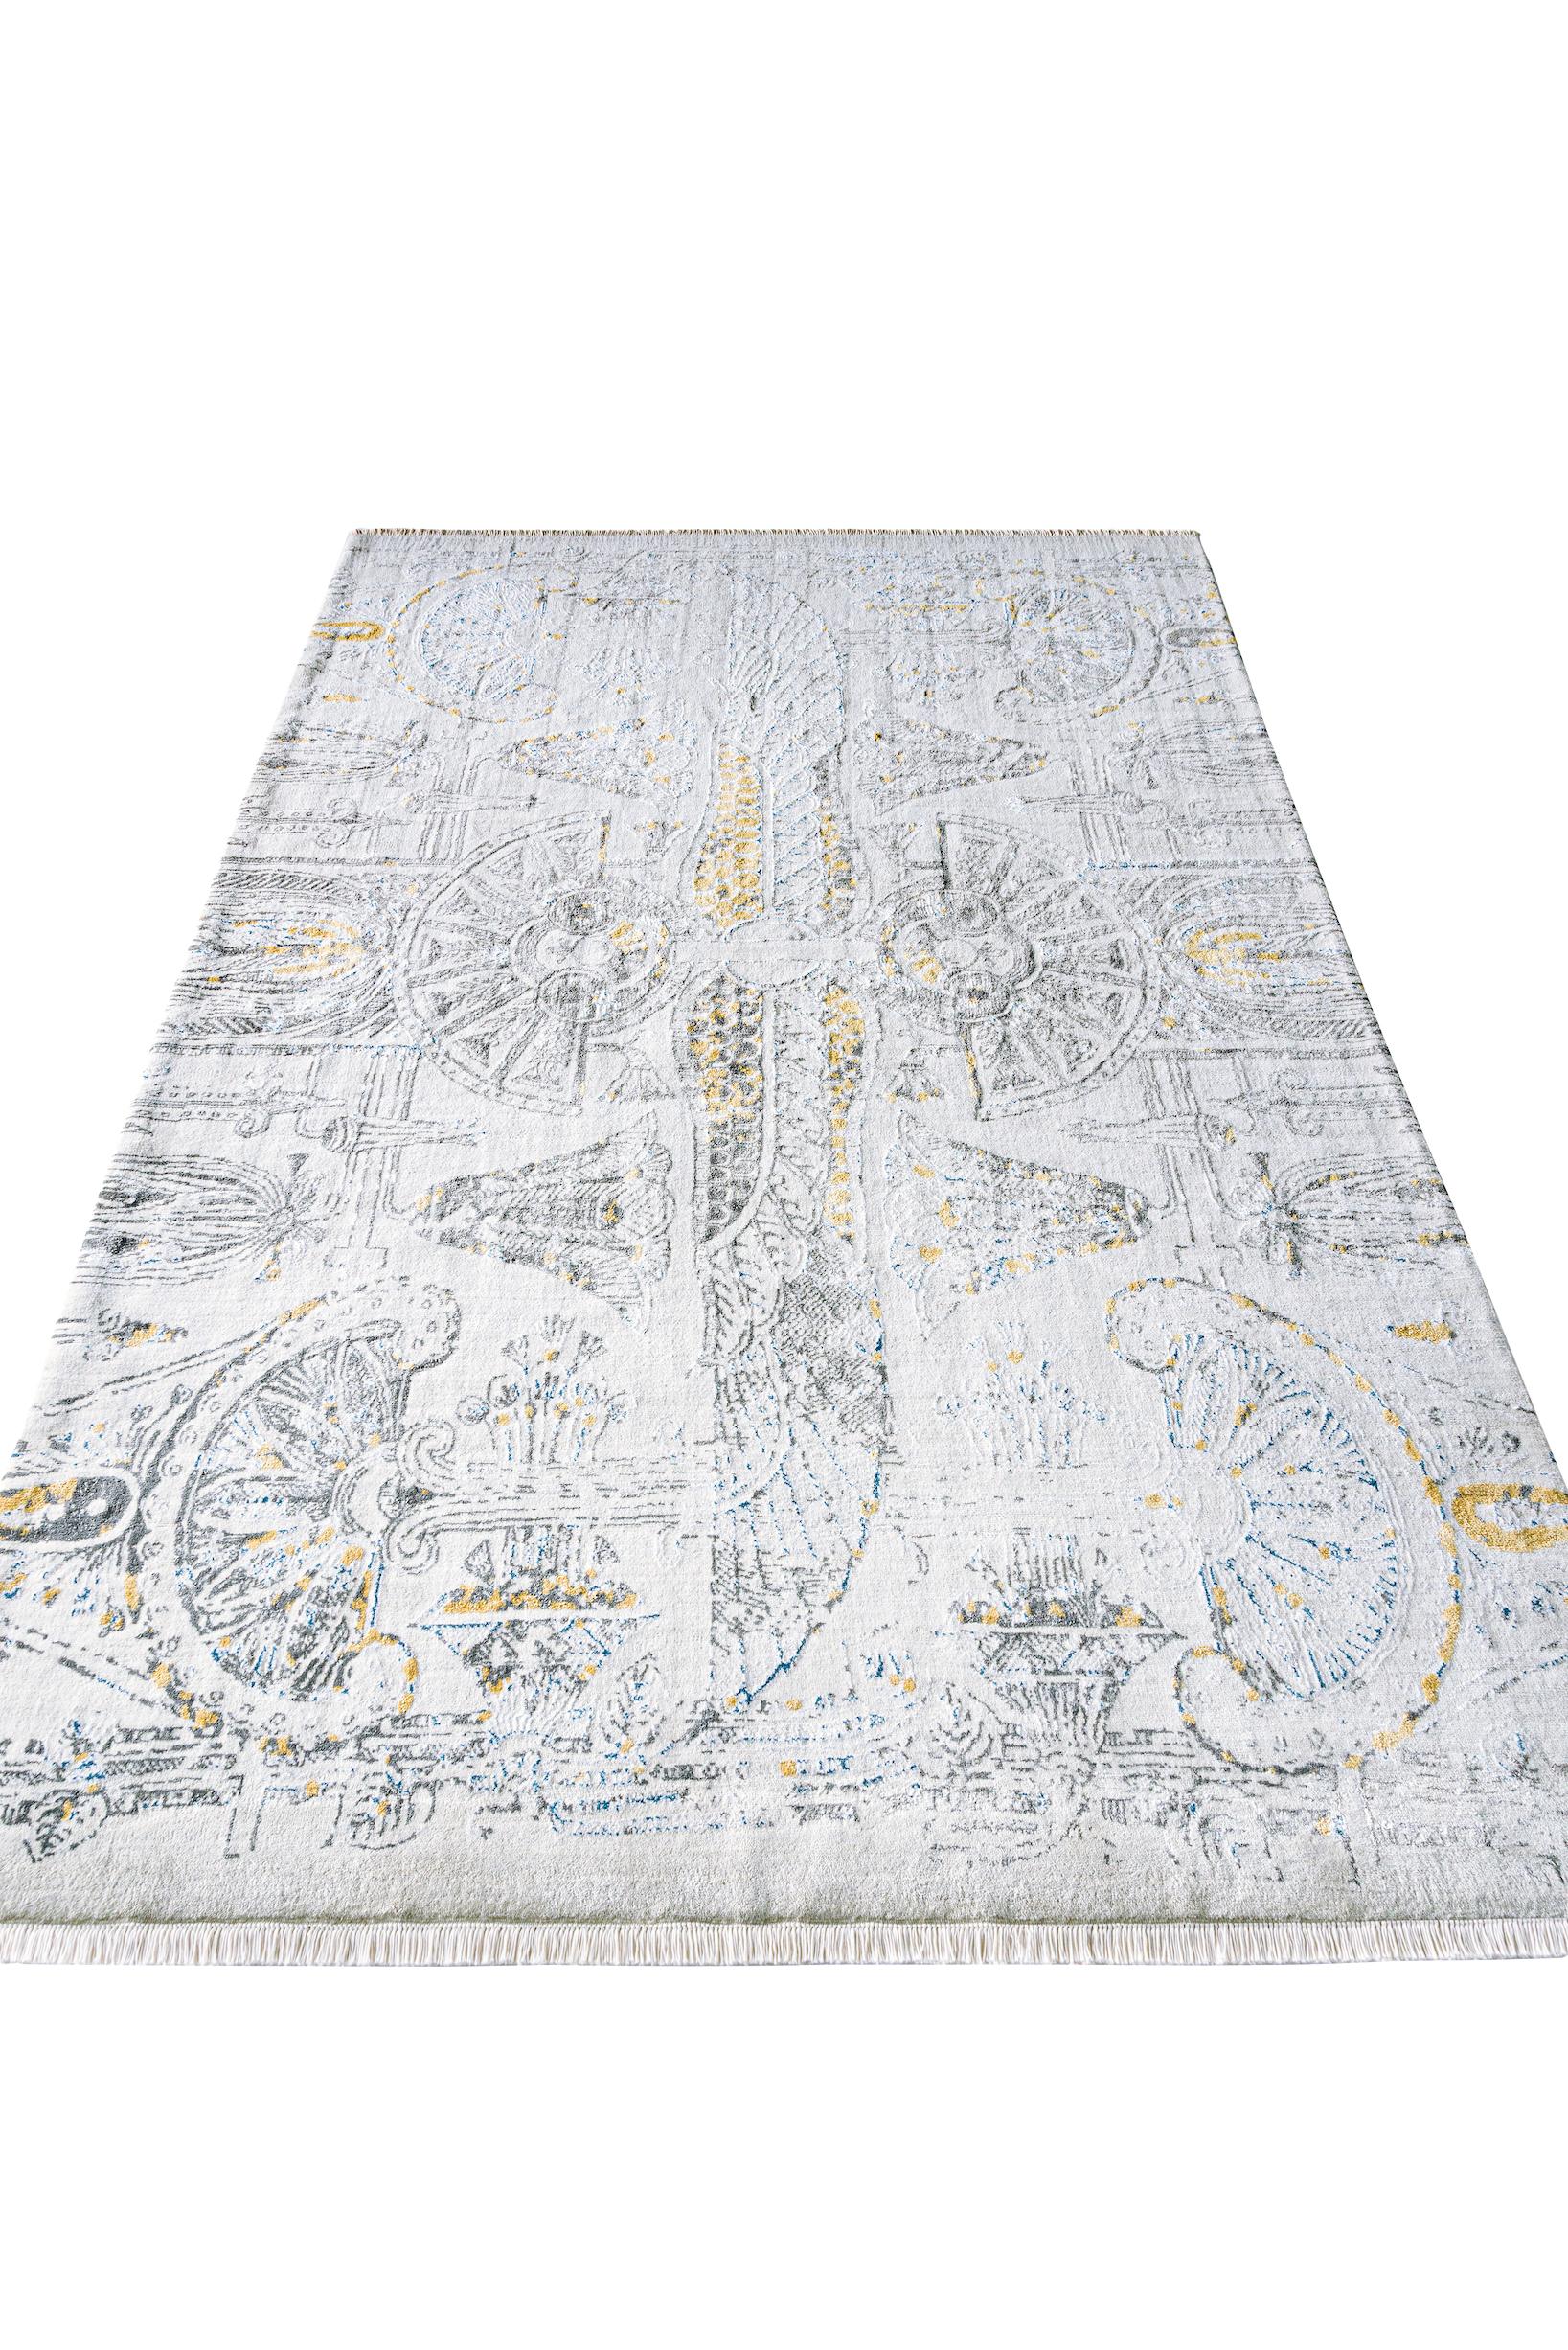 Art Deco Kahhal Looms Wings Hand-Knotted 350x250cm Rug by Shosha Kamal For Sale